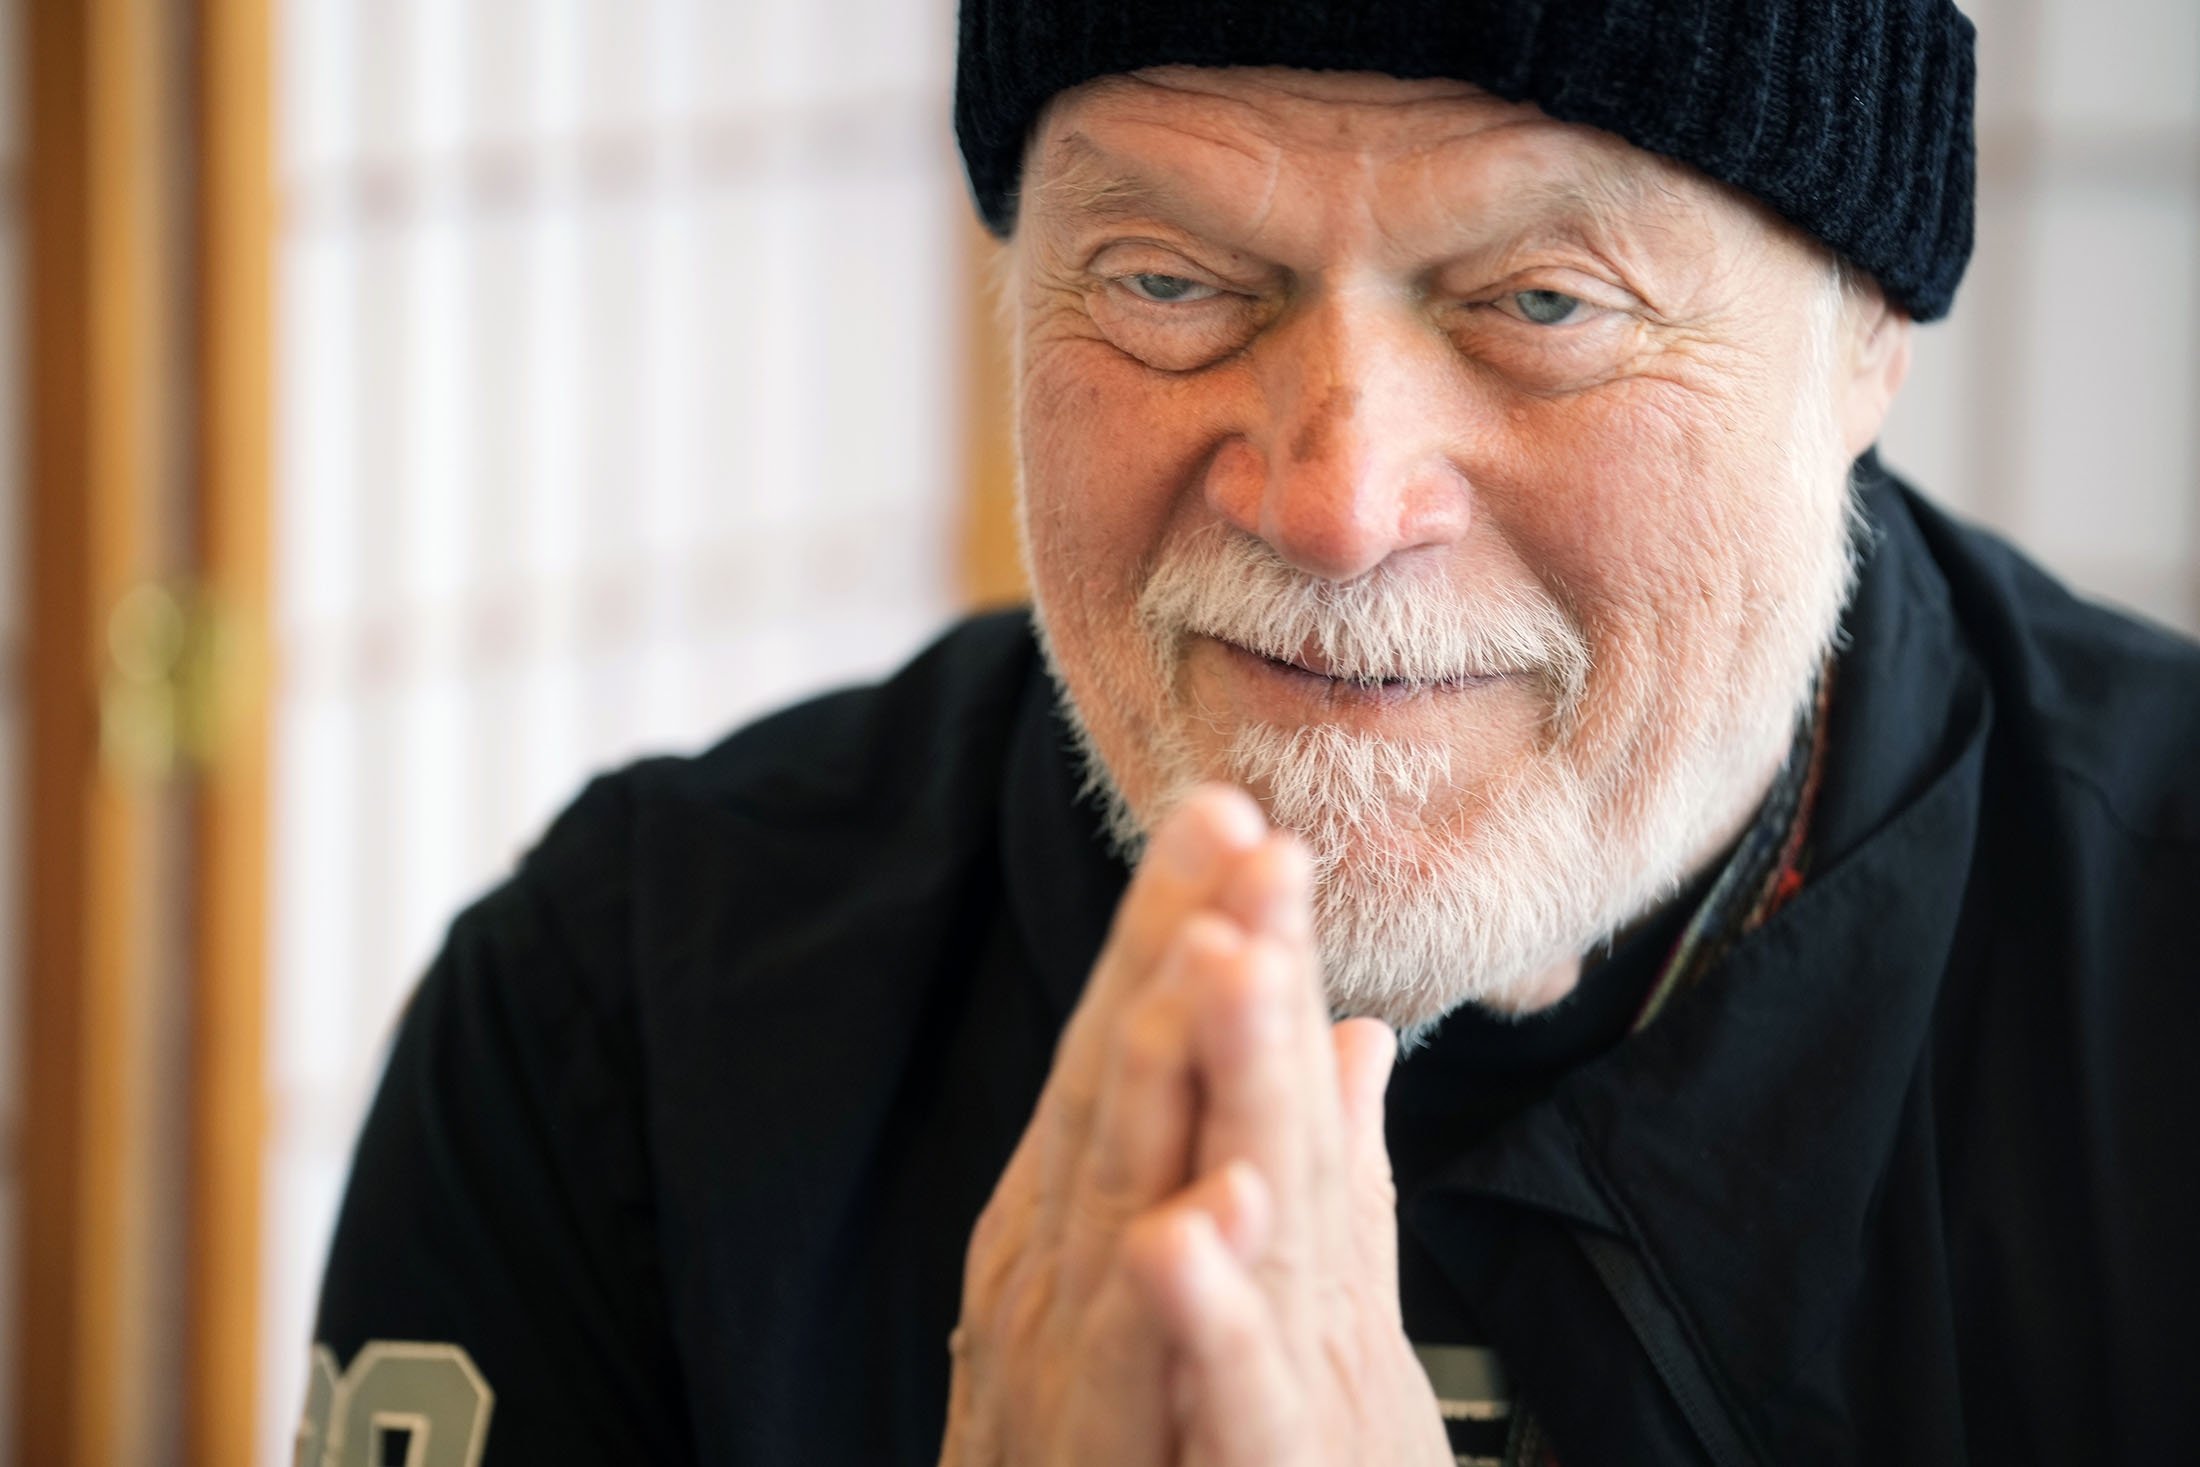 Canadian rock legend Randy Bachman gestures during an interview with AP at Canadian Embassy in Tokyo, Japan, July 1, 2022. (AP Photo)